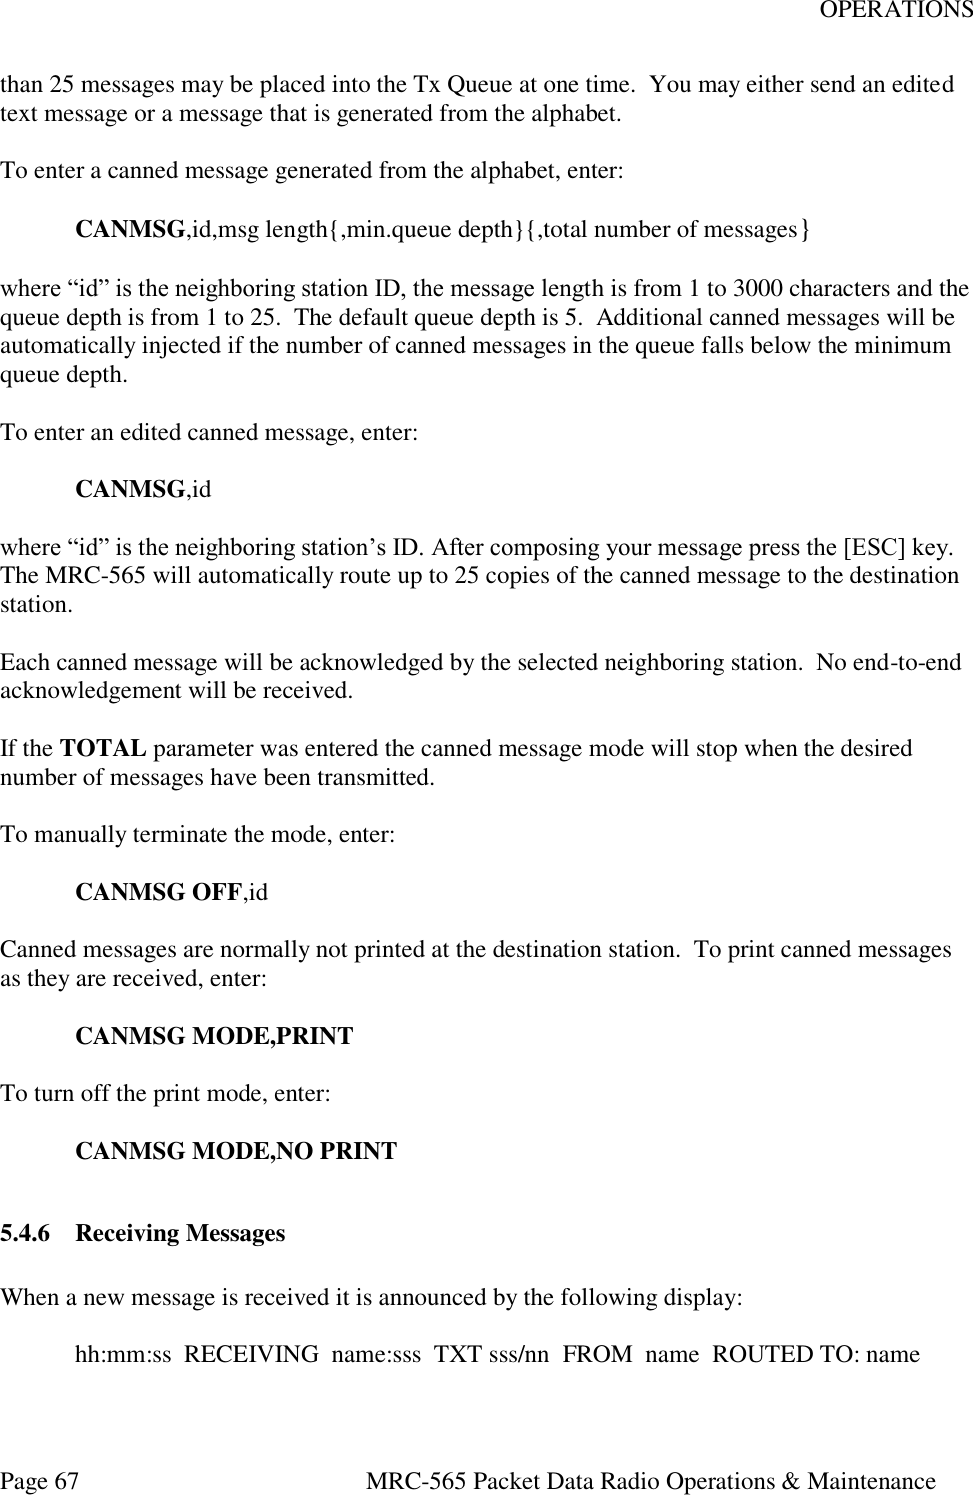 OPERATIONS Page 67  MRC-565 Packet Data Radio Operations &amp; Maintenance than 25 messages may be placed into the Tx Queue at one time.  You may either send an edited text message or a message that is generated from the alphabet.  To enter a canned message generated from the alphabet, enter:   CANMSG,id,msg length{,min.queue depth}{,total number of messages}  where “id” is the neighboring station ID, the message length is from 1 to 3000 characters and the queue depth is from 1 to 25.  The default queue depth is 5.  Additional canned messages will be automatically injected if the number of canned messages in the queue falls below the minimum queue depth.  To enter an edited canned message, enter:   CANMSG,id  where “id” is the neighboring station’s ID. After composing your message press the [ESC] key.  The MRC-565 will automatically route up to 25 copies of the canned message to the destination station.   Each canned message will be acknowledged by the selected neighboring station.  No end-to-end acknowledgement will be received.  If the TOTAL parameter was entered the canned message mode will stop when the desired number of messages have been transmitted.  To manually terminate the mode, enter:   CANMSG OFF,id  Canned messages are normally not printed at the destination station.  To print canned messages as they are received, enter:   CANMSG MODE,PRINT  To turn off the print mode, enter:   CANMSG MODE,NO PRINT  5.4.6 Receiving Messages  When a new message is received it is announced by the following display:    hh:mm:ss  RECEIVING  name:sss  TXT sss/nn  FROM  name  ROUTED TO: name  